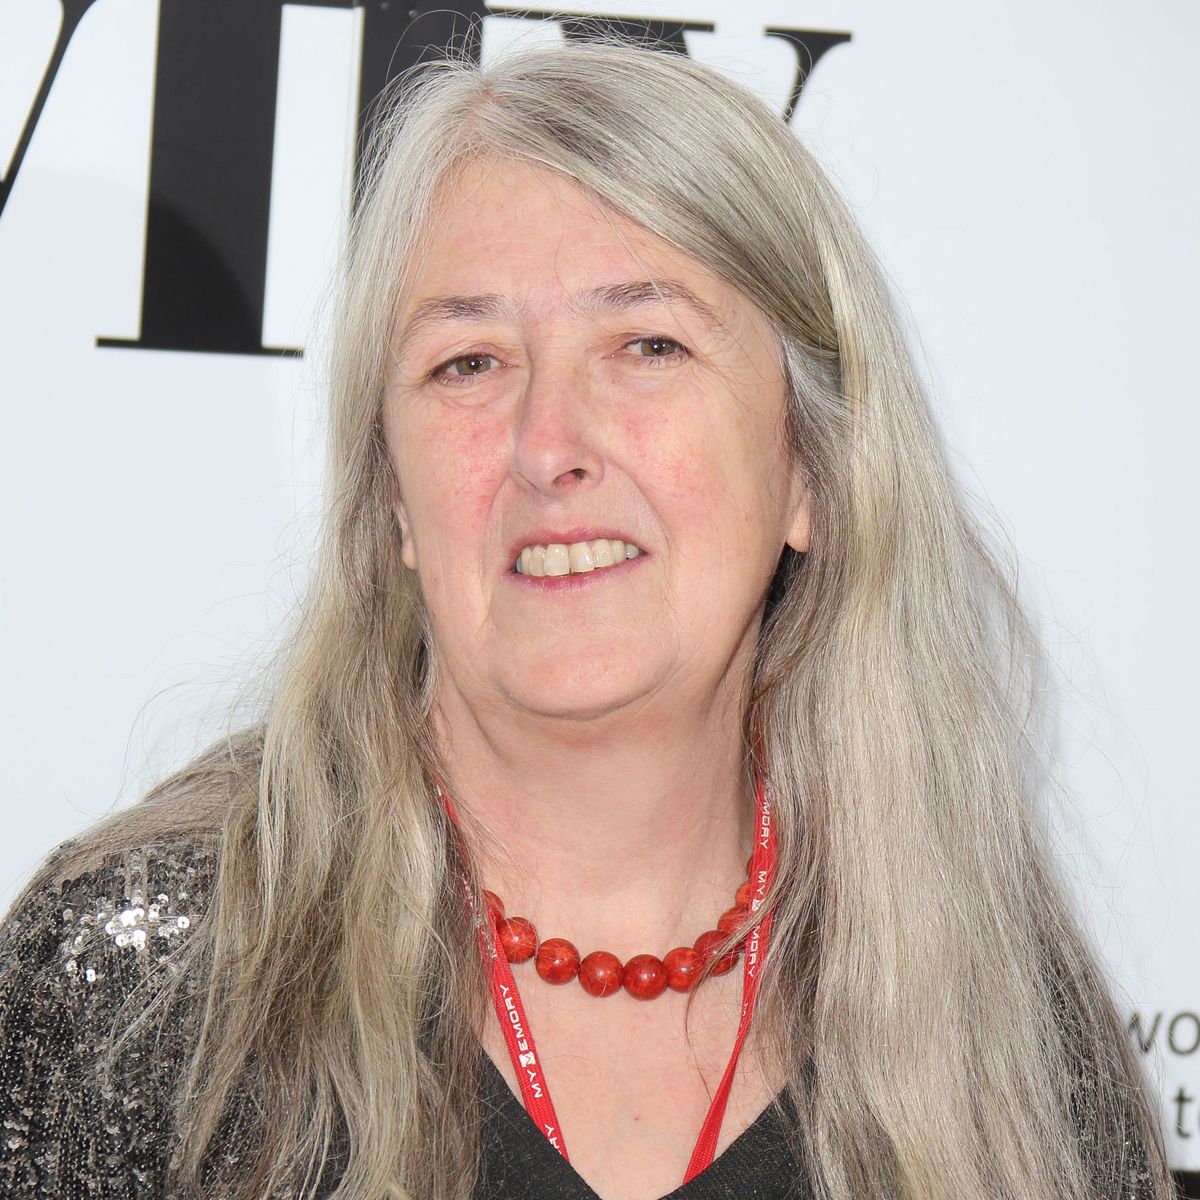 Mary Beard is wrong about dyeing grey hair - I'm not a victim